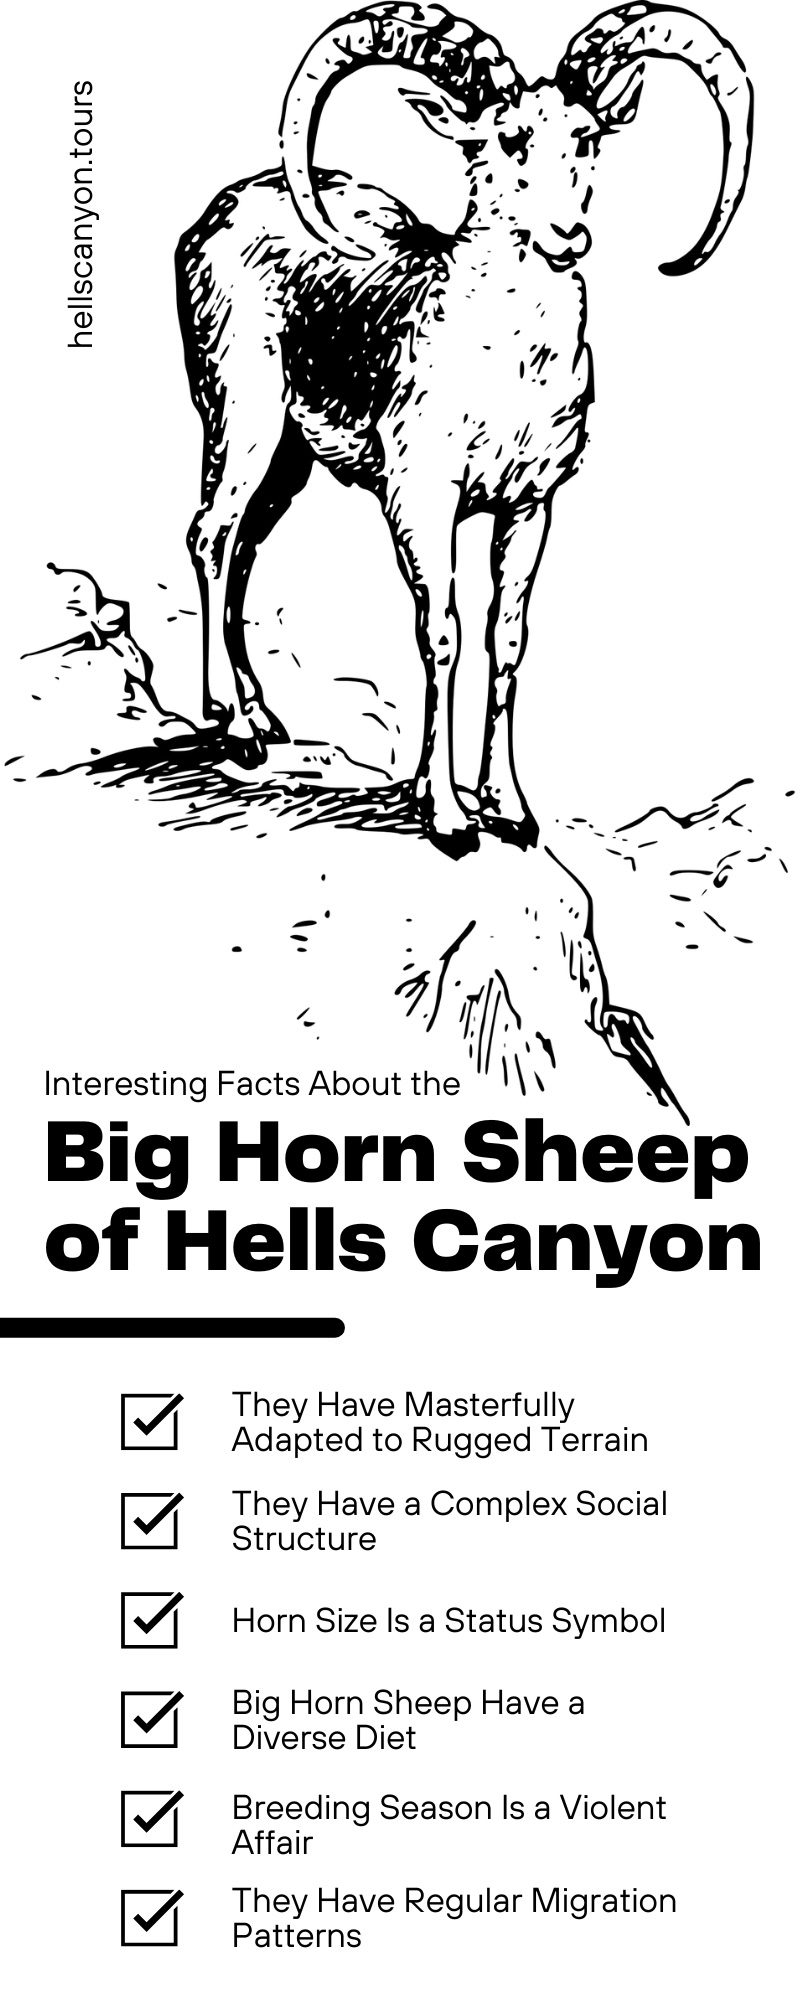 Interesting Facts About the Big Horn Sheep of Hells Canyon